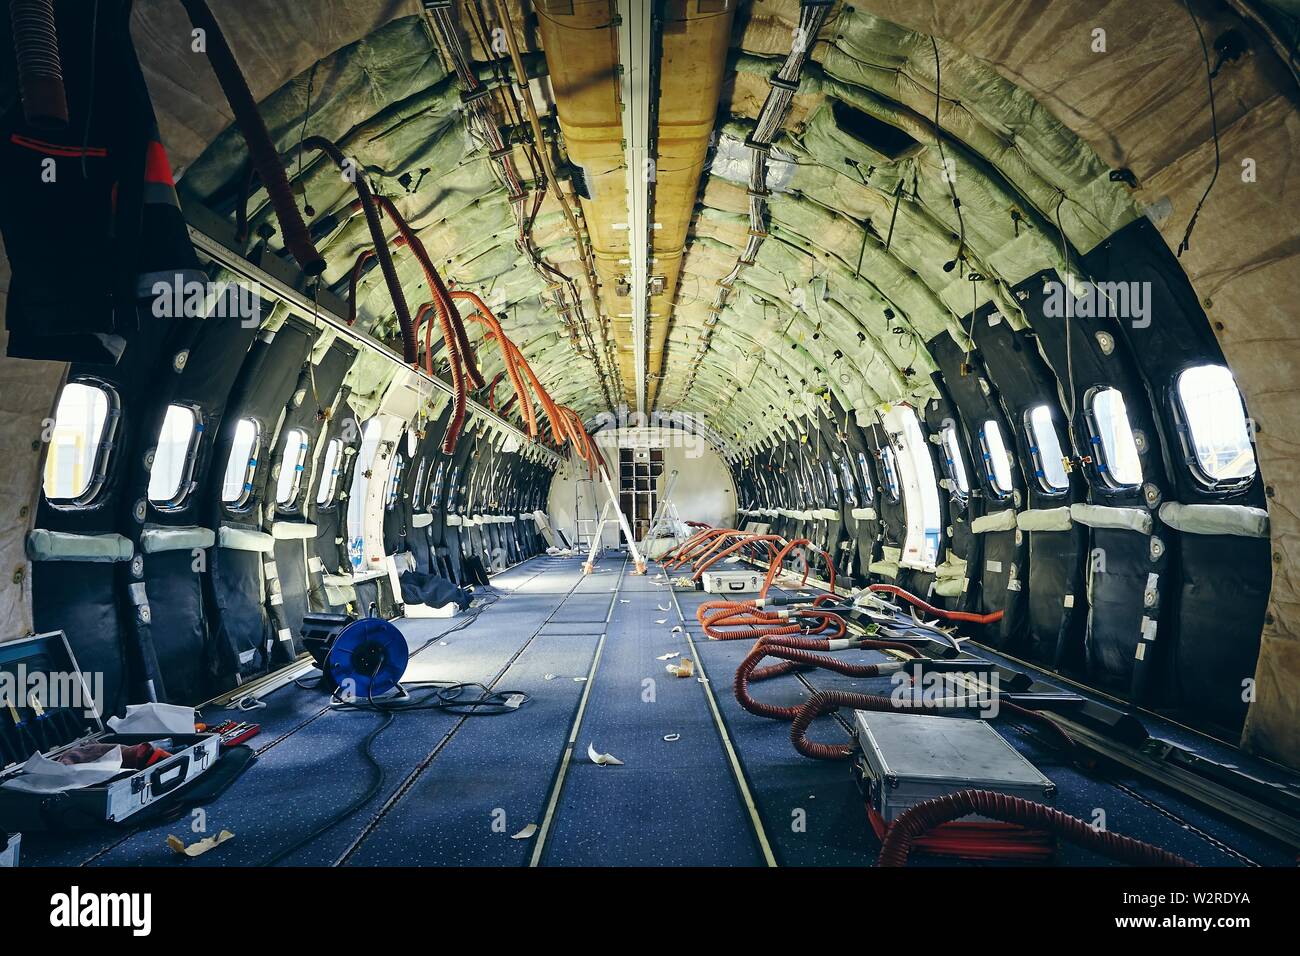 Interior of commercial airplane under heavy maintenance. Themes safety, control and aerospace industry. Stock Photo